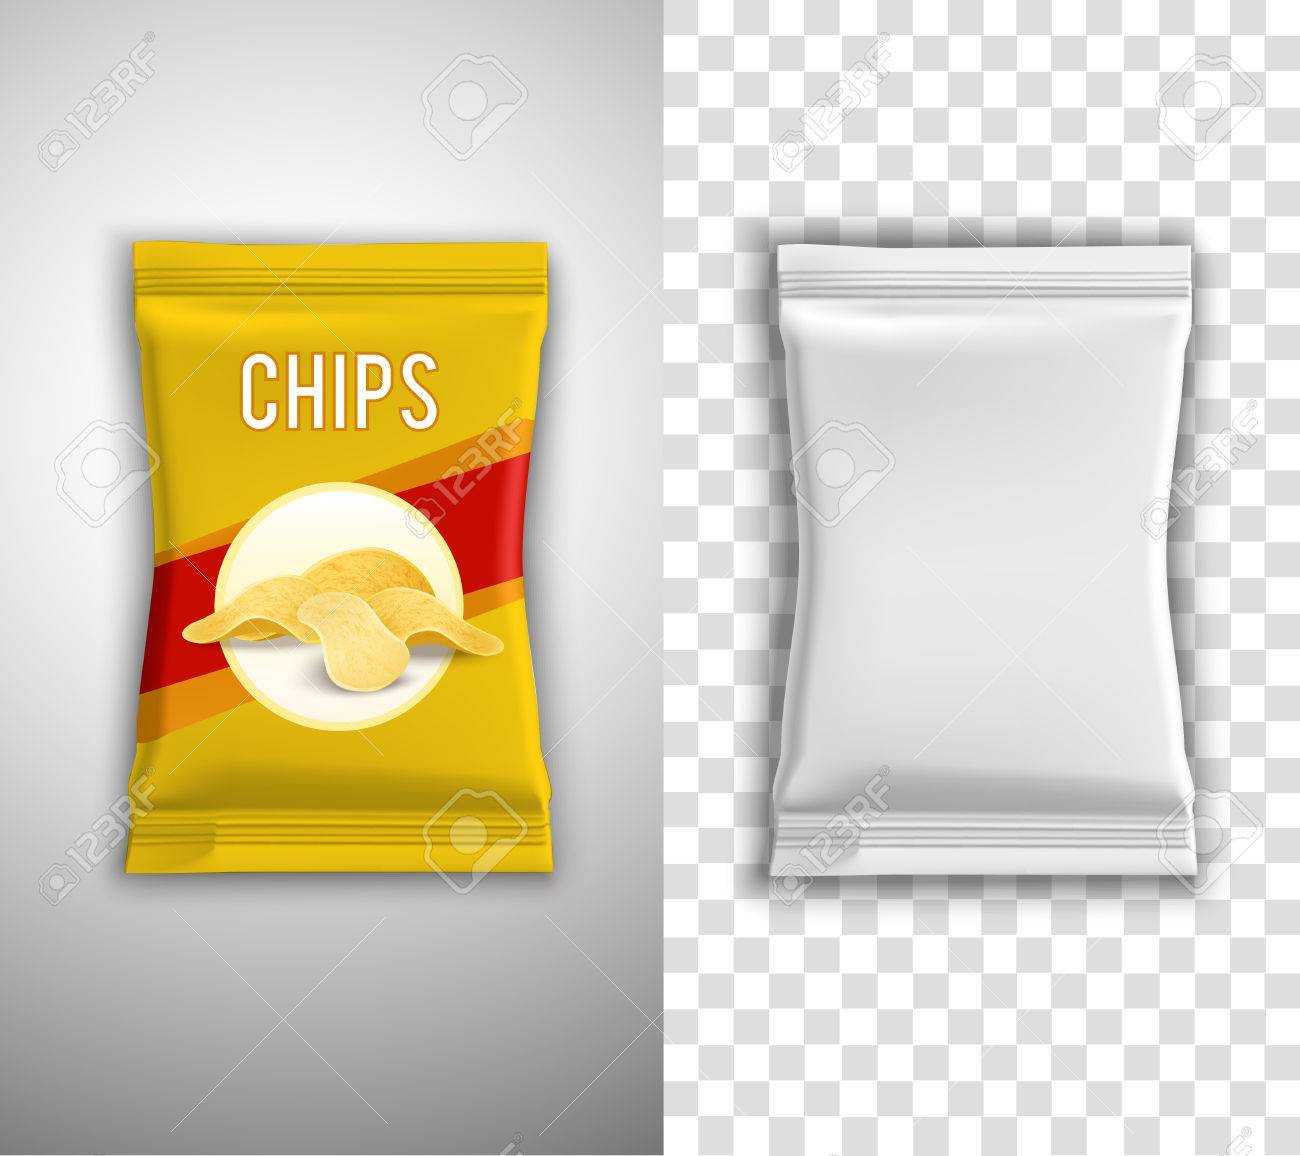 Chips Realistic Packaging Design With Blank White Template And.. Intended For Blank Packaging Templates